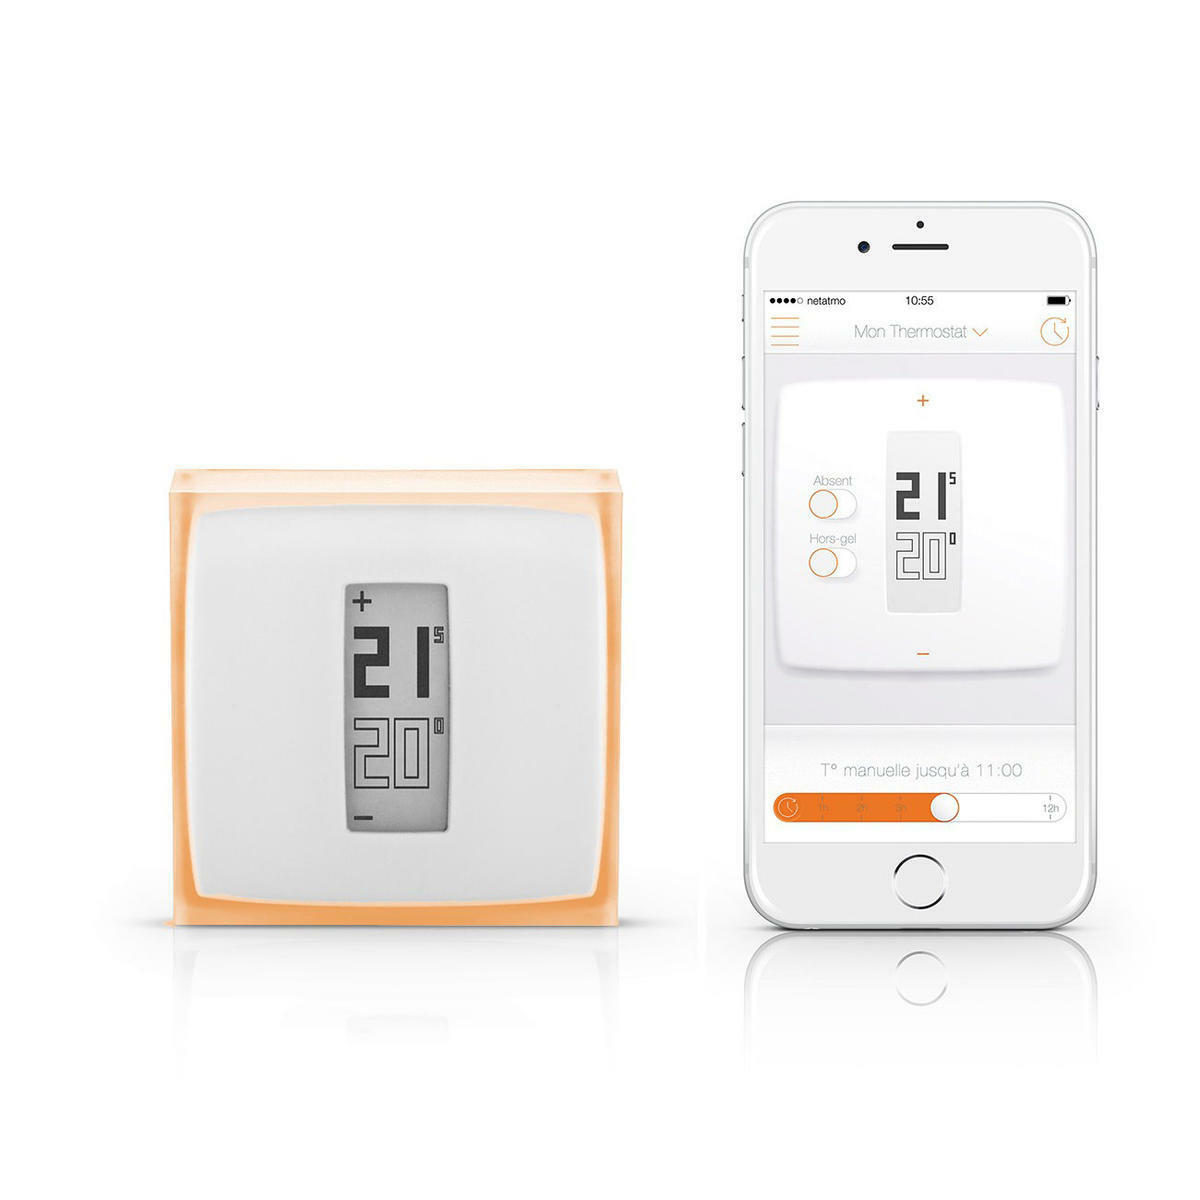 https://www.macnificos.com/sites/files/styles/product_page_zoom/public/images/product/nth01-ec-01-netatmo-termostato-wifi-control-smartphonetablet-o-pc2.jpeg?itok=4ByuCQvL